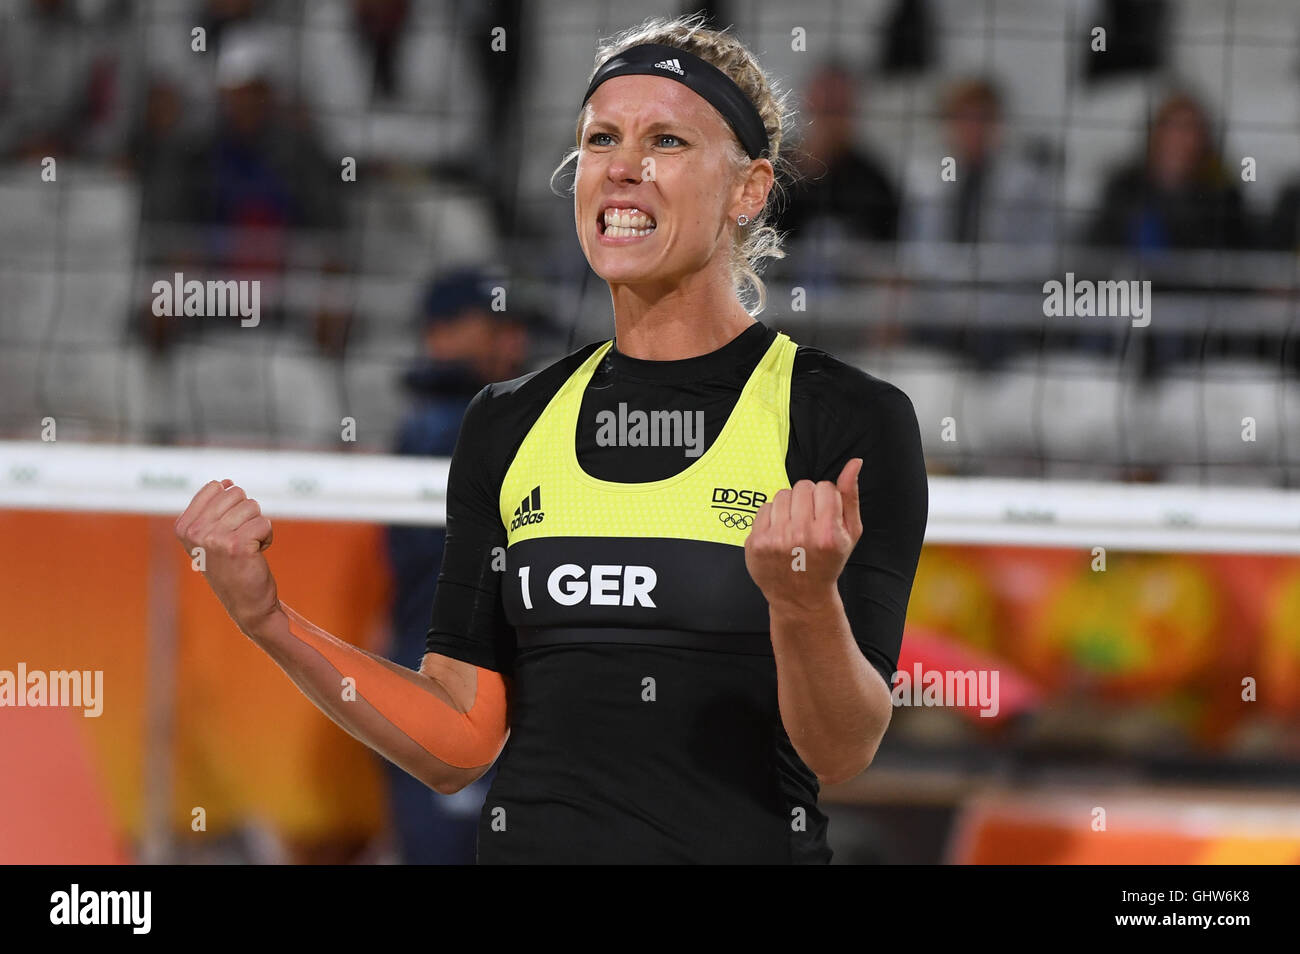 Rio de Janeiro, Brazil. 11th Aug, 2016. Karla Borger of Germany reacts during the Women's Lucky Loser match Pazo/Agudo of Venezuela against Borger/Buethe of Germany at the Beach Volleyball events during the Rio 2016 Olympic Games at the Beach Volleyball Arena Copacabana in Rio de Janeiro, Brazil, 11 August 2016. Photo: Sebastian Kahnert/dpa/Alamy Live News Stock Photo